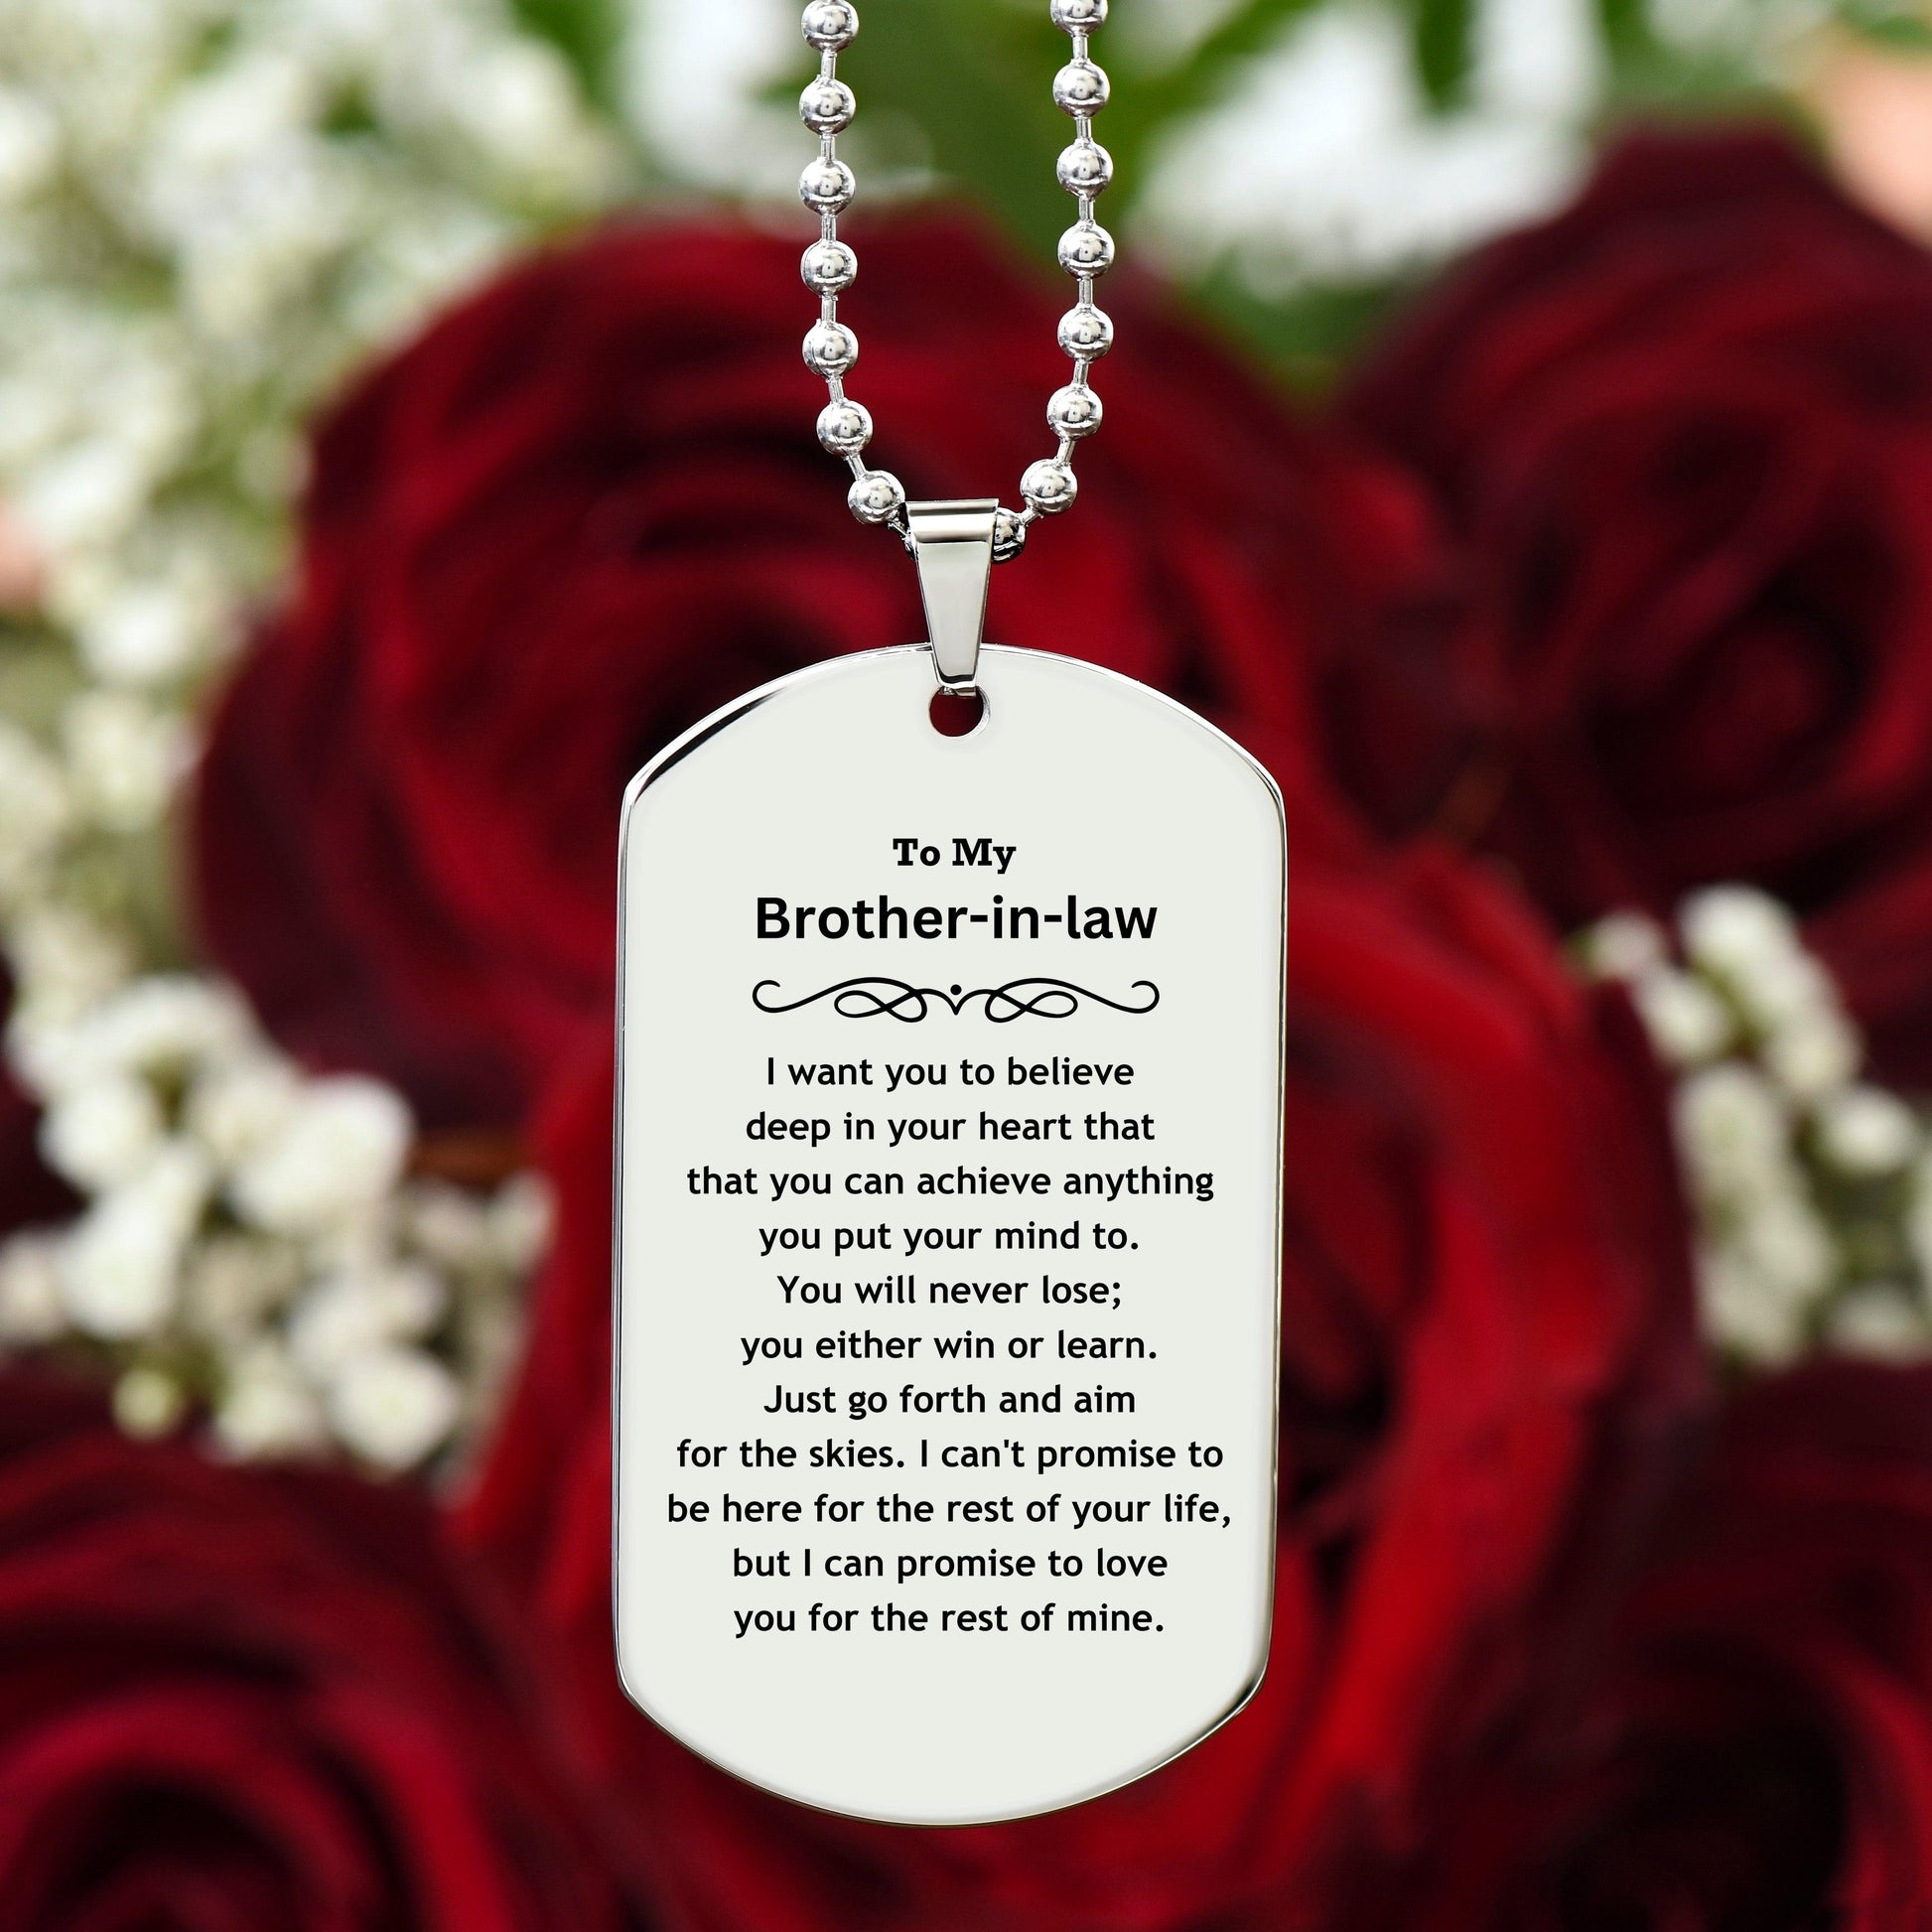 Motivational Brother-in-law Silver Dog Tag Engraved Necklace, I can promise to love you for the rest of my life, Birthday Christmas Jewelry Gift - Mallard Moon Gift Shop